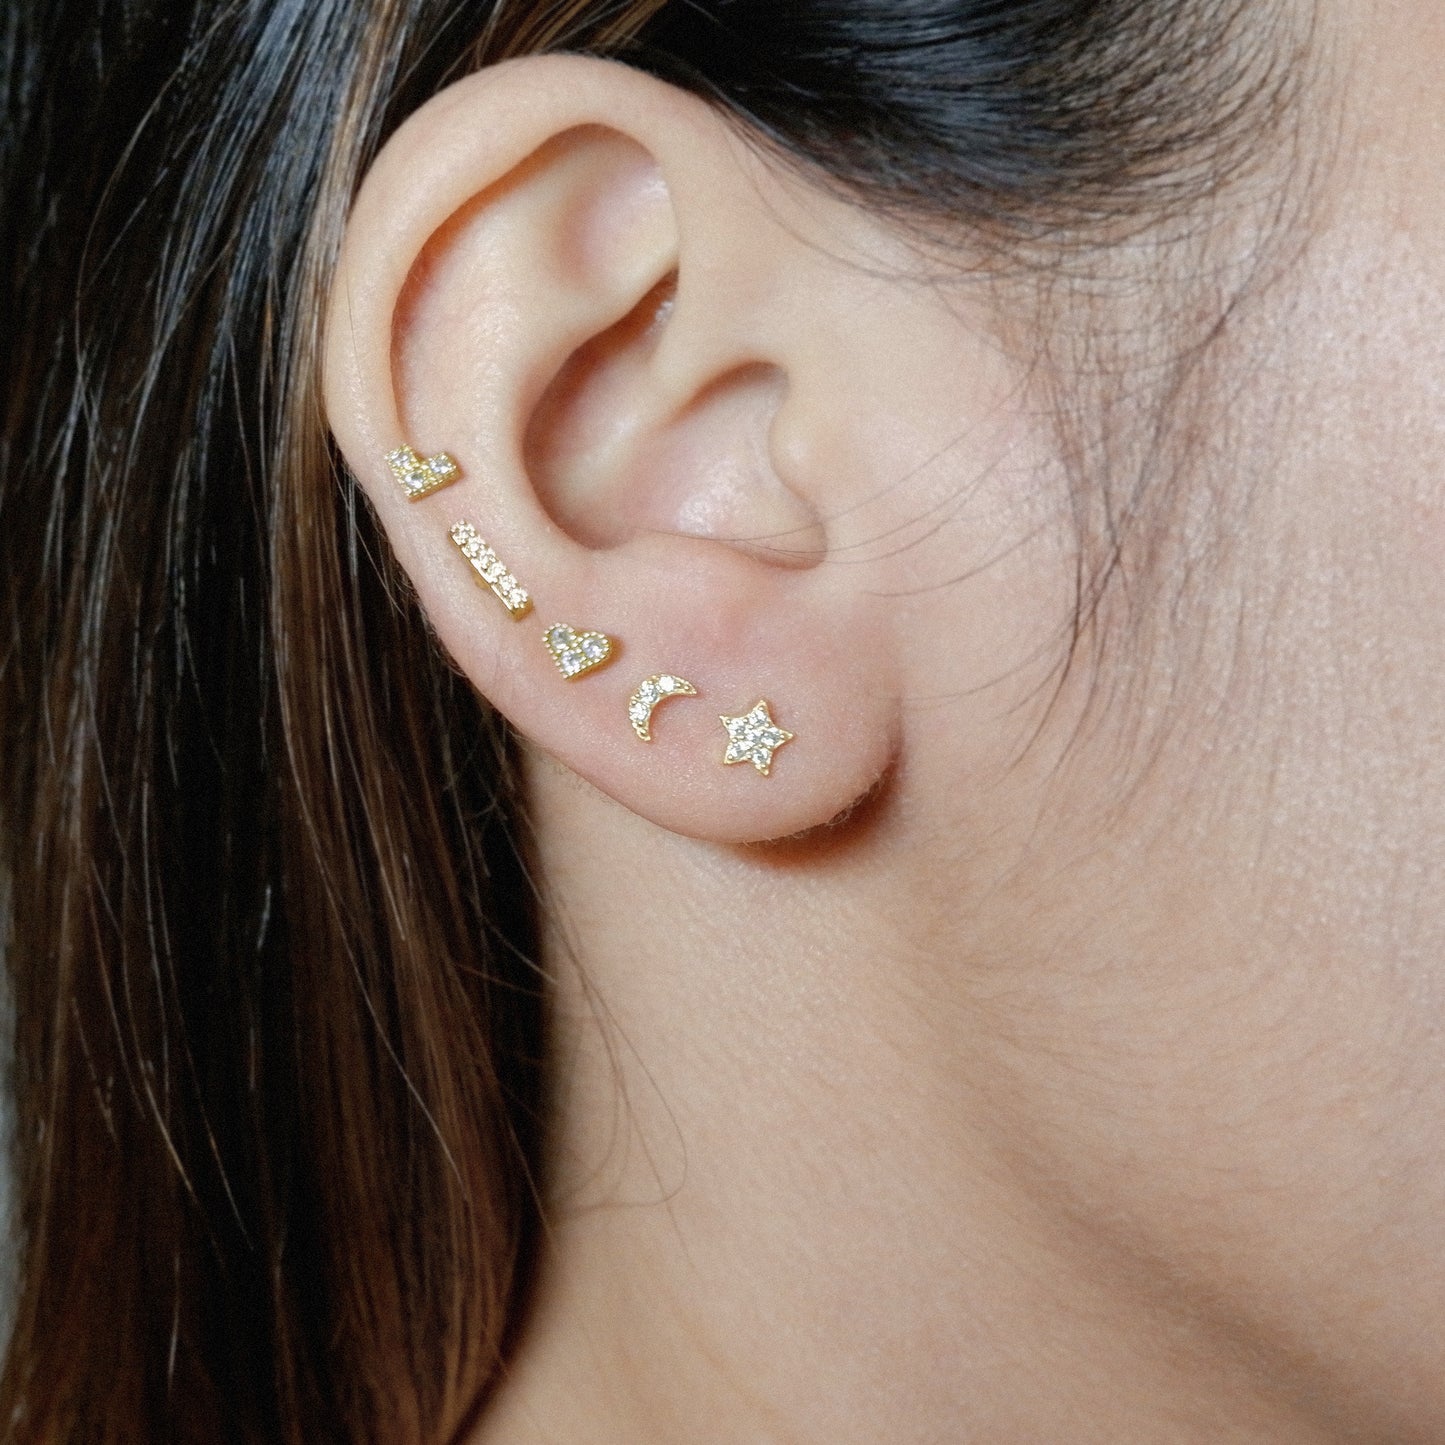 The Edgy Screw Back Studs